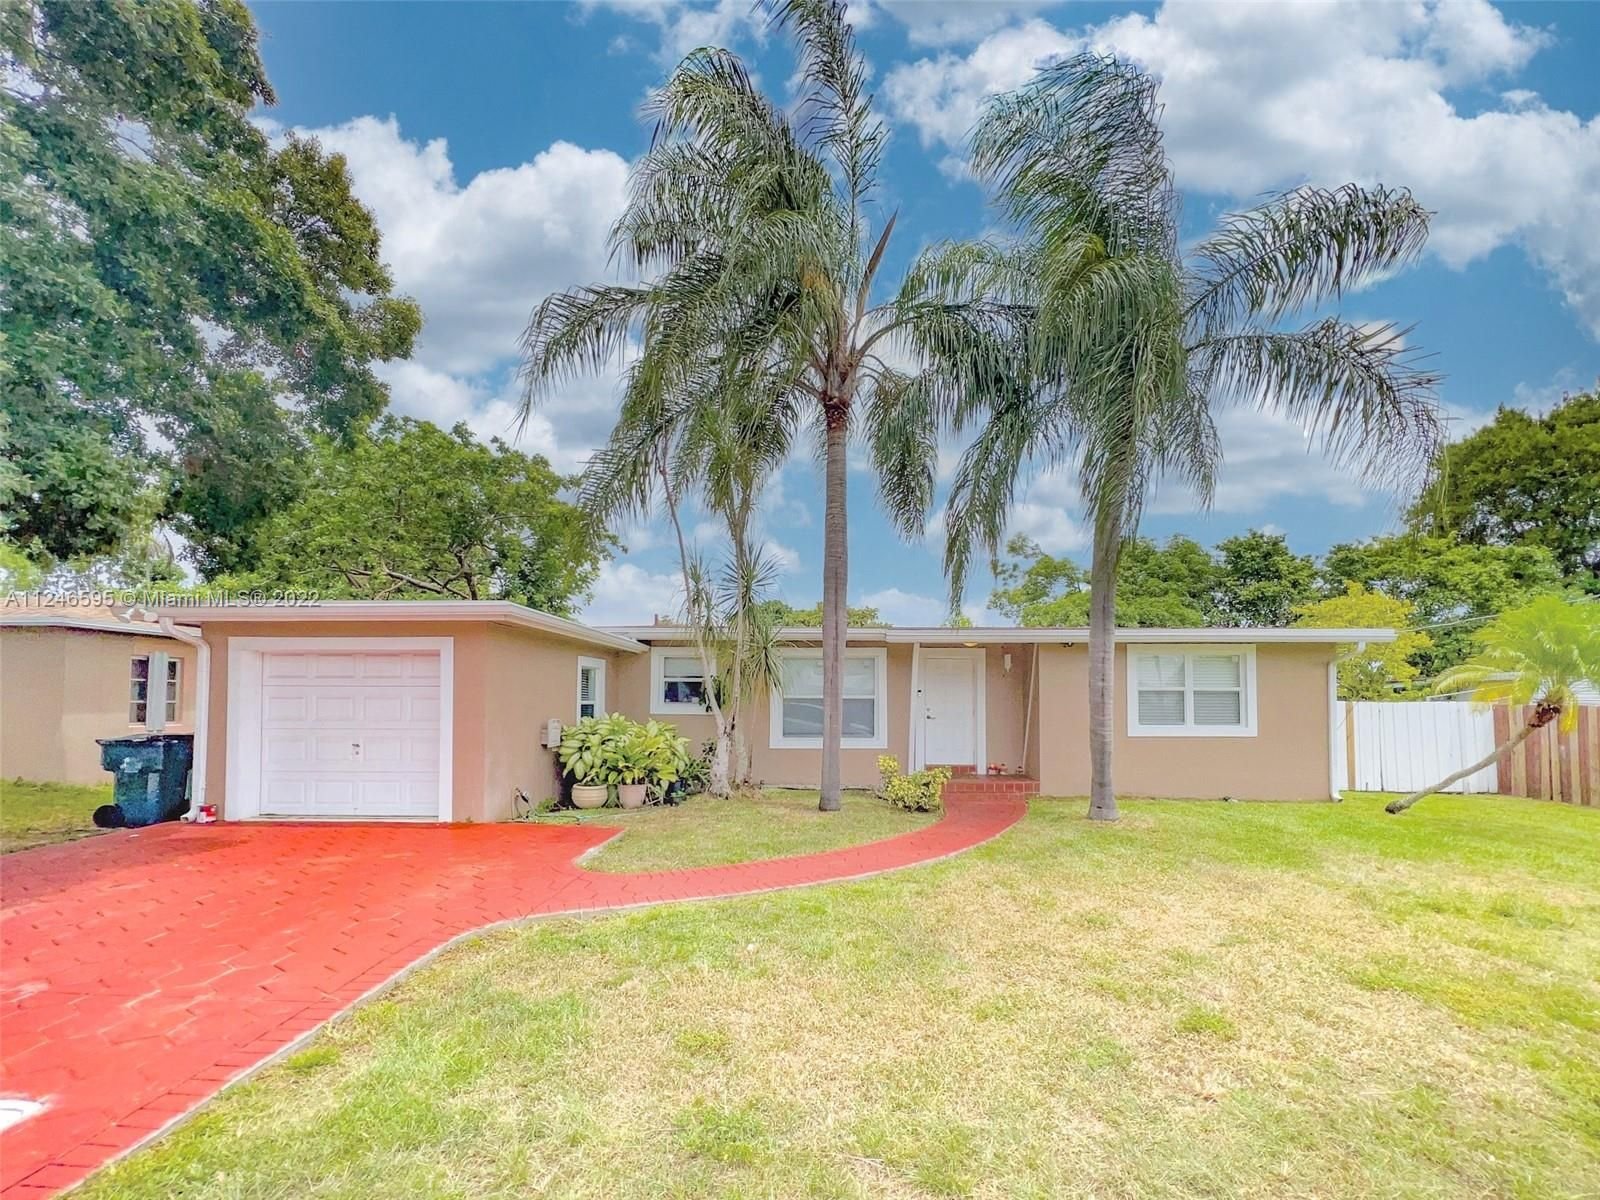 Real estate property located at 622 6th St, Broward County, Hallandale Beach, FL